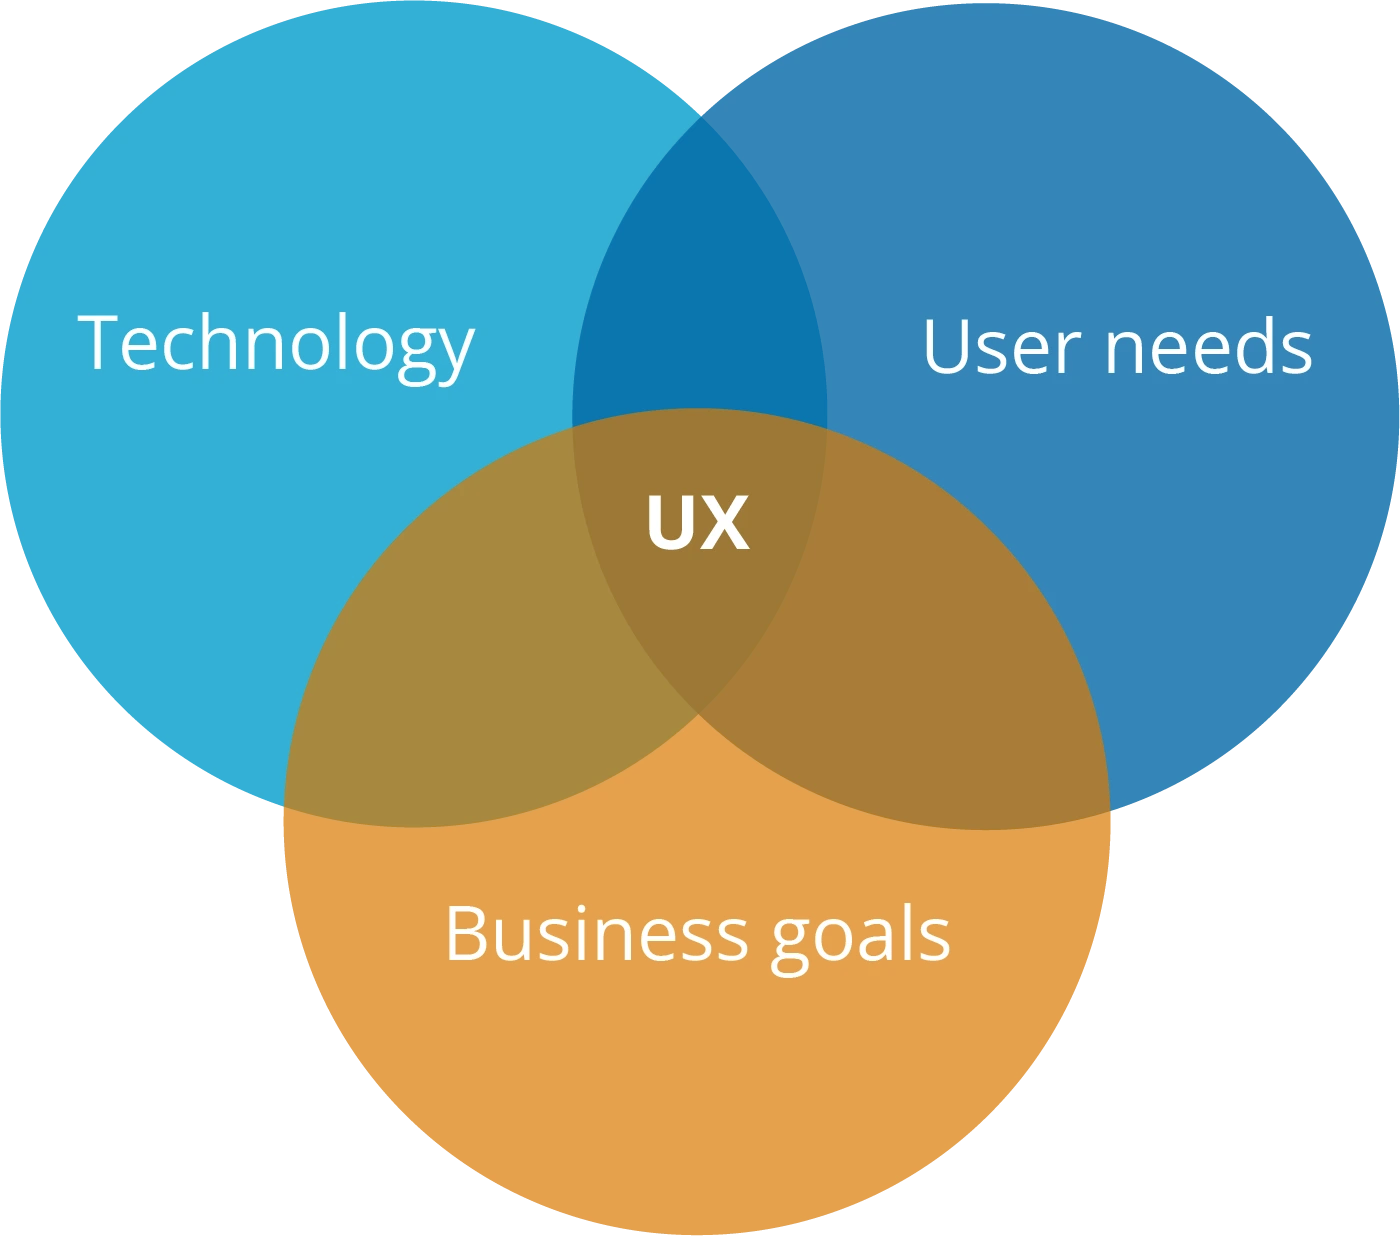 Scheme about the three parts of UX Design: Technology, User needs and Business goals